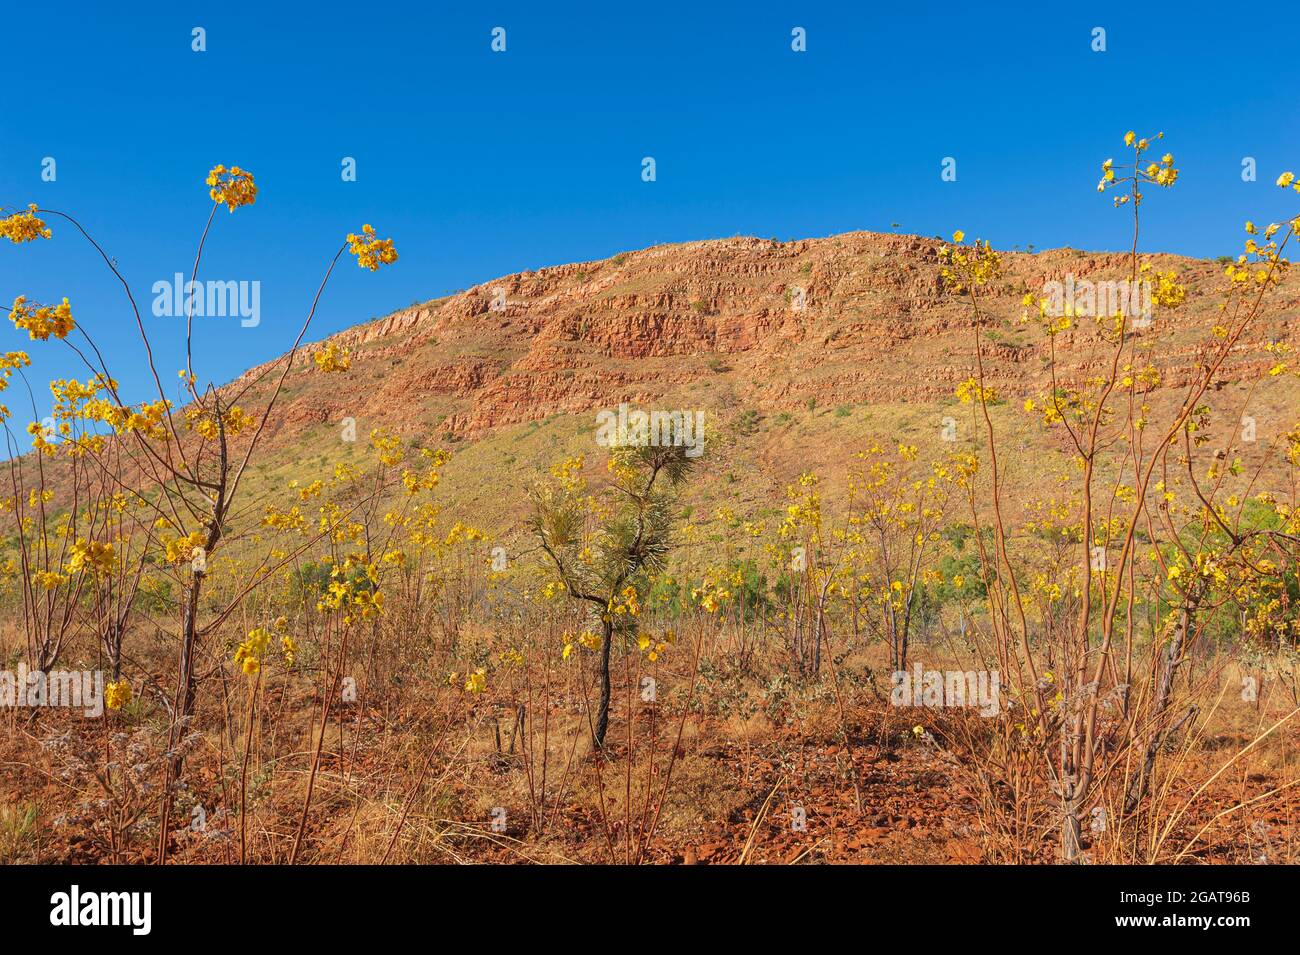 Kapok trees (Cochlospermum fraseri) in bloom with their yellow flowers in the Outback, Mornington Wilderness Camp, Kimberley Region, Western Australia Stock Photo